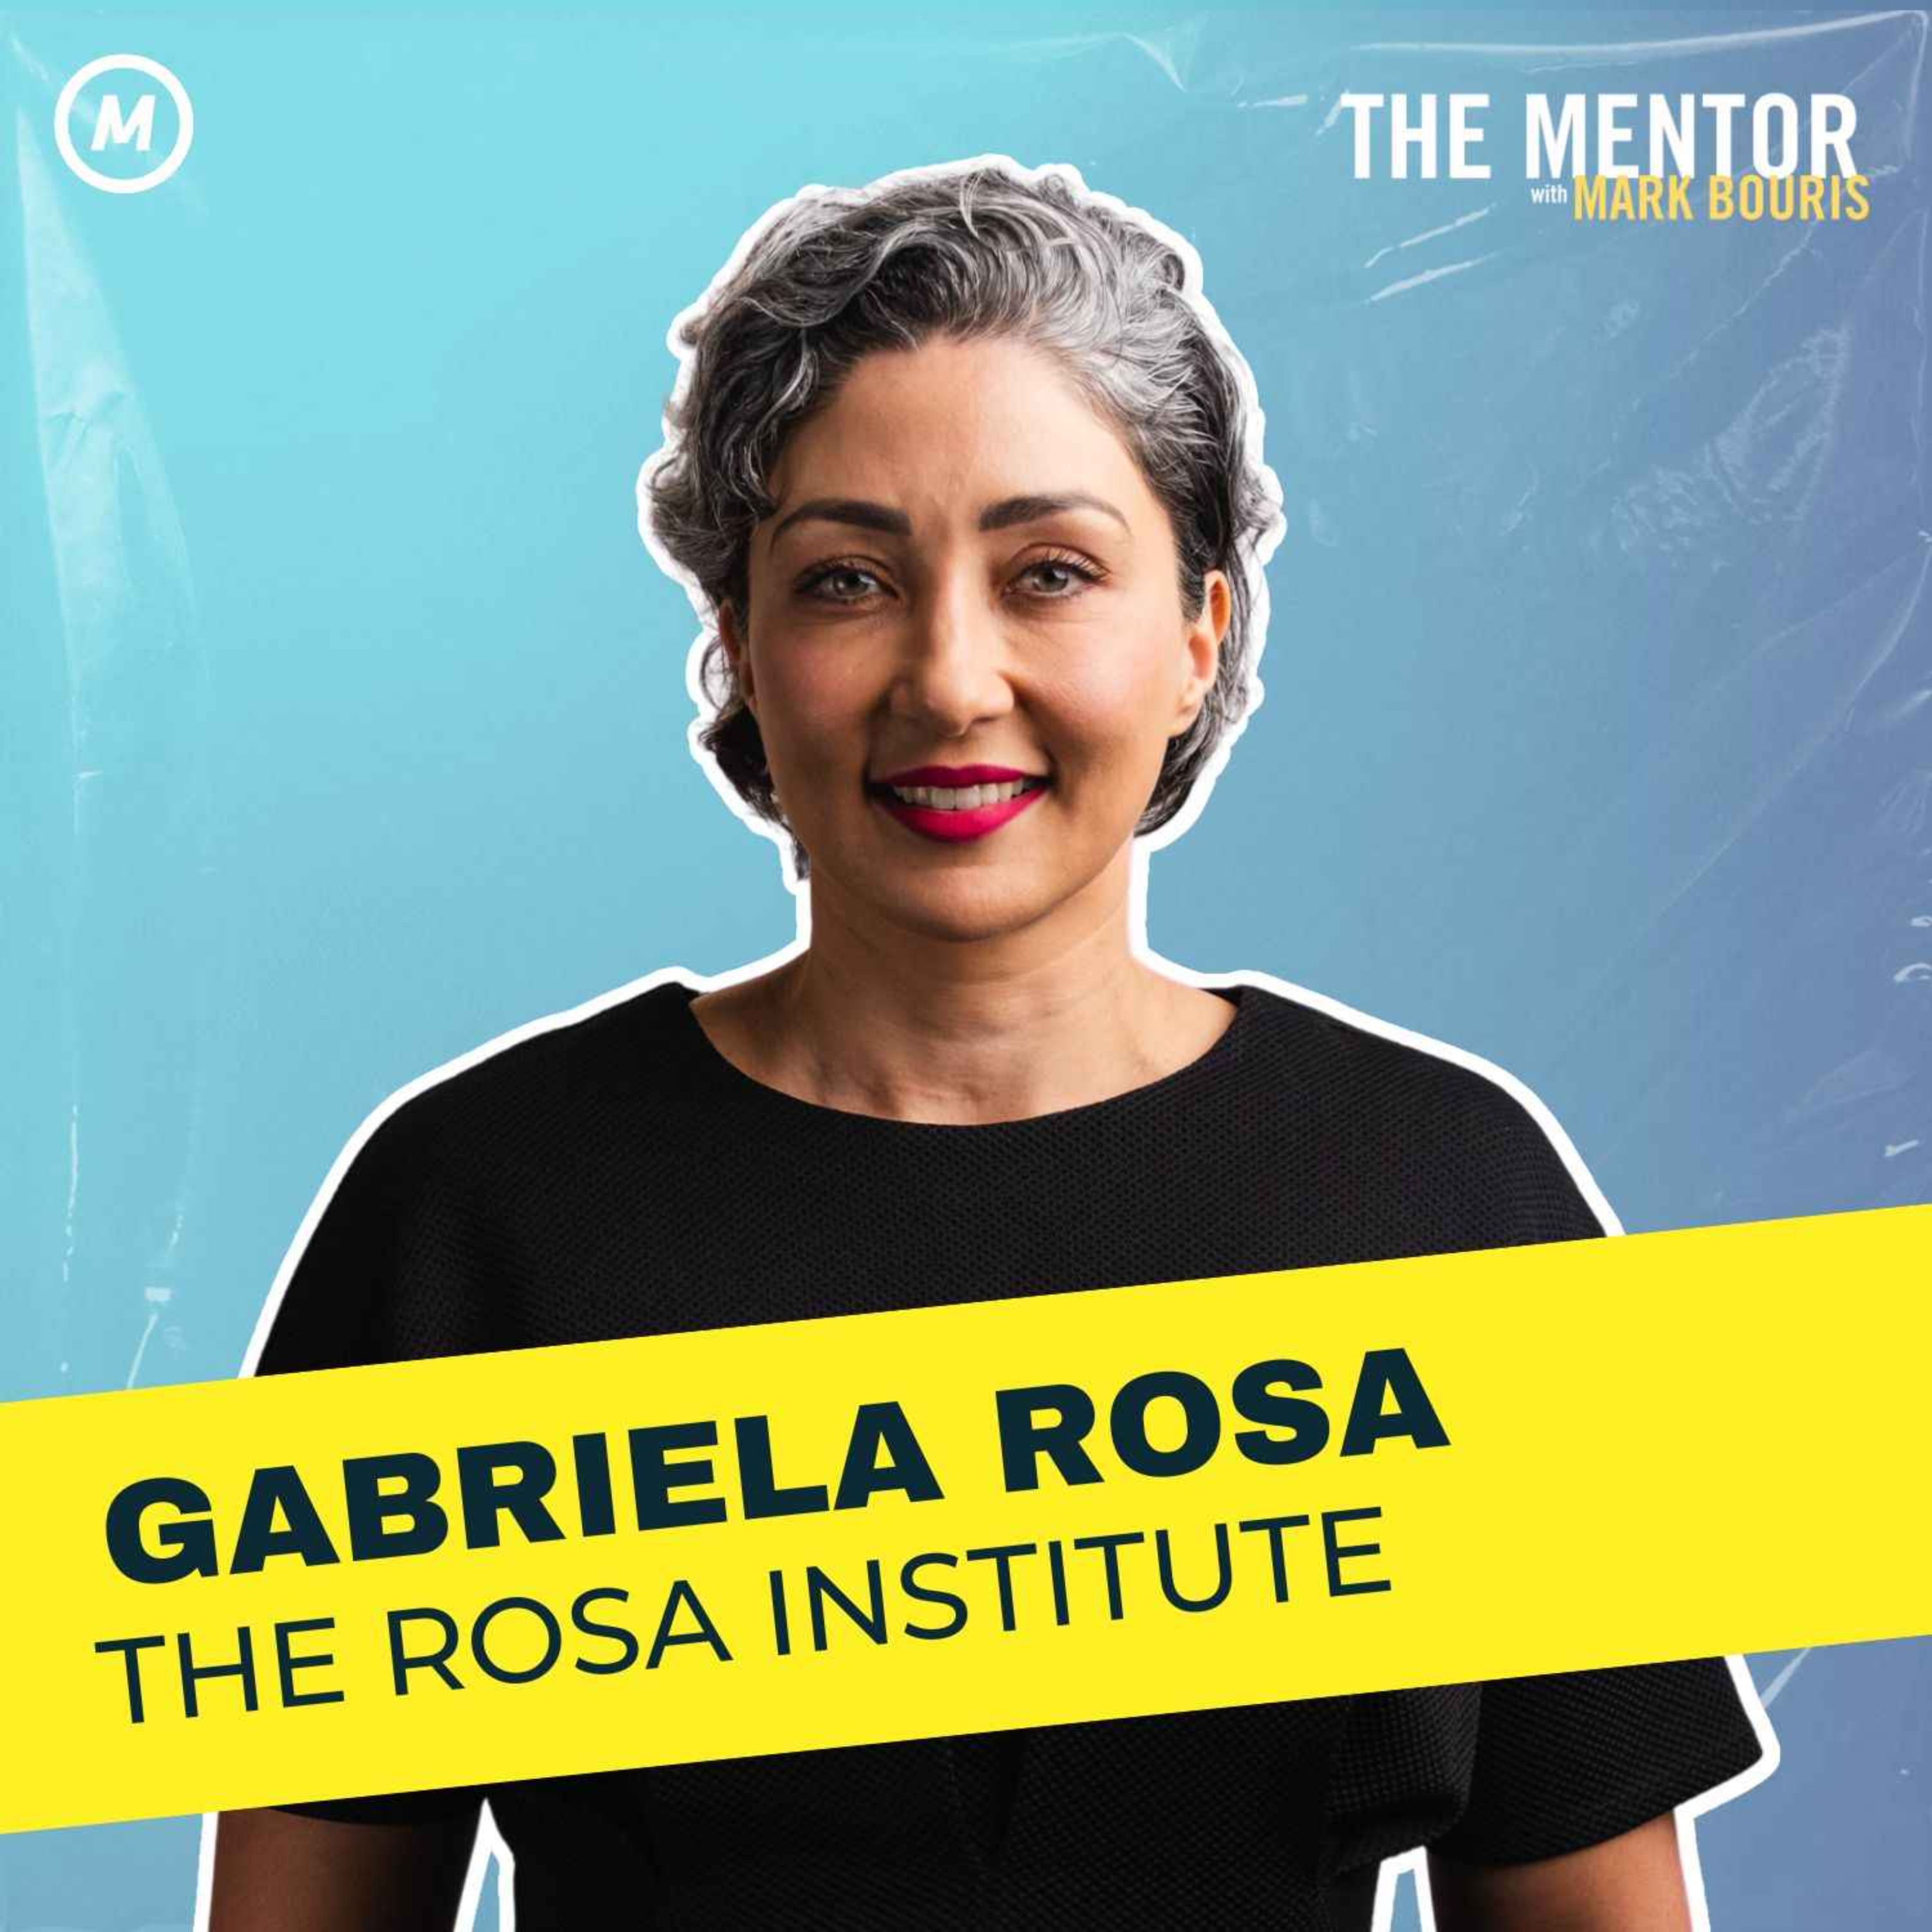 #432 The Fertility Queen: How Gabriela Rosa's work has helped 100s of thousands